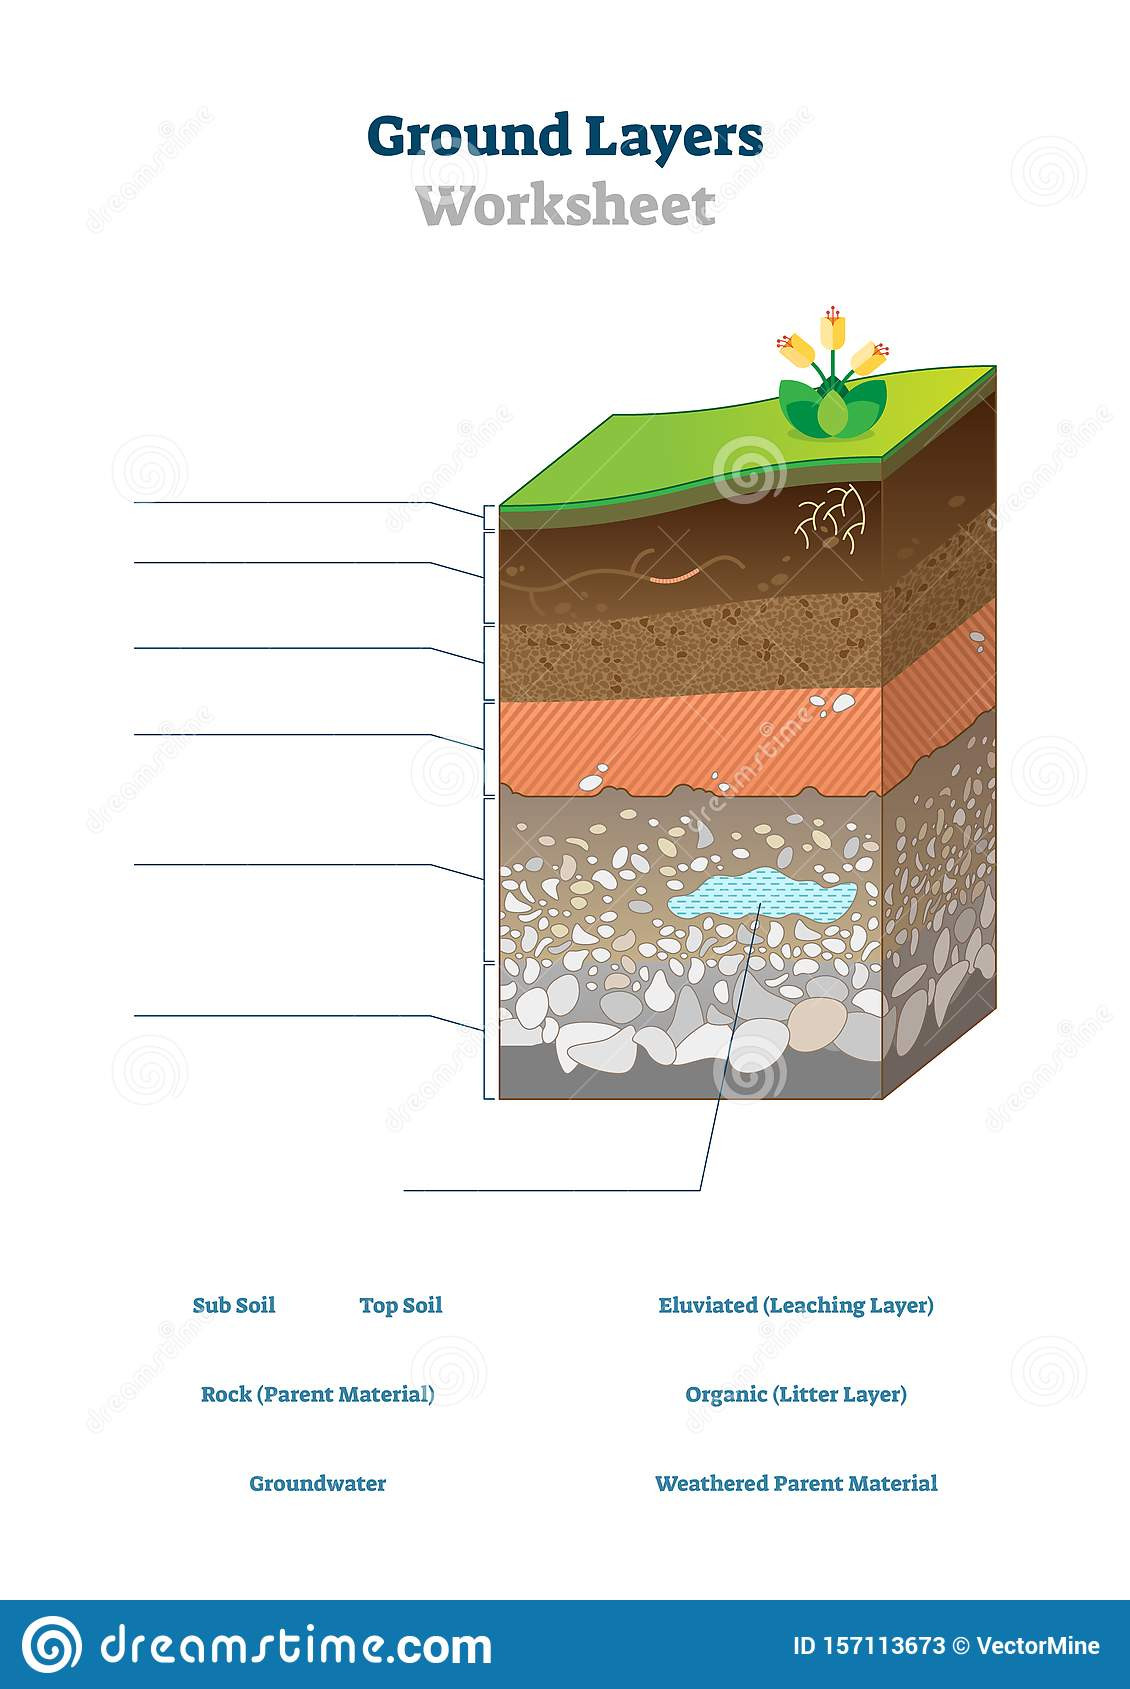 Layers Of the Earth Worksheet Ground Layers Worksheet Vector Illustration soil Surface